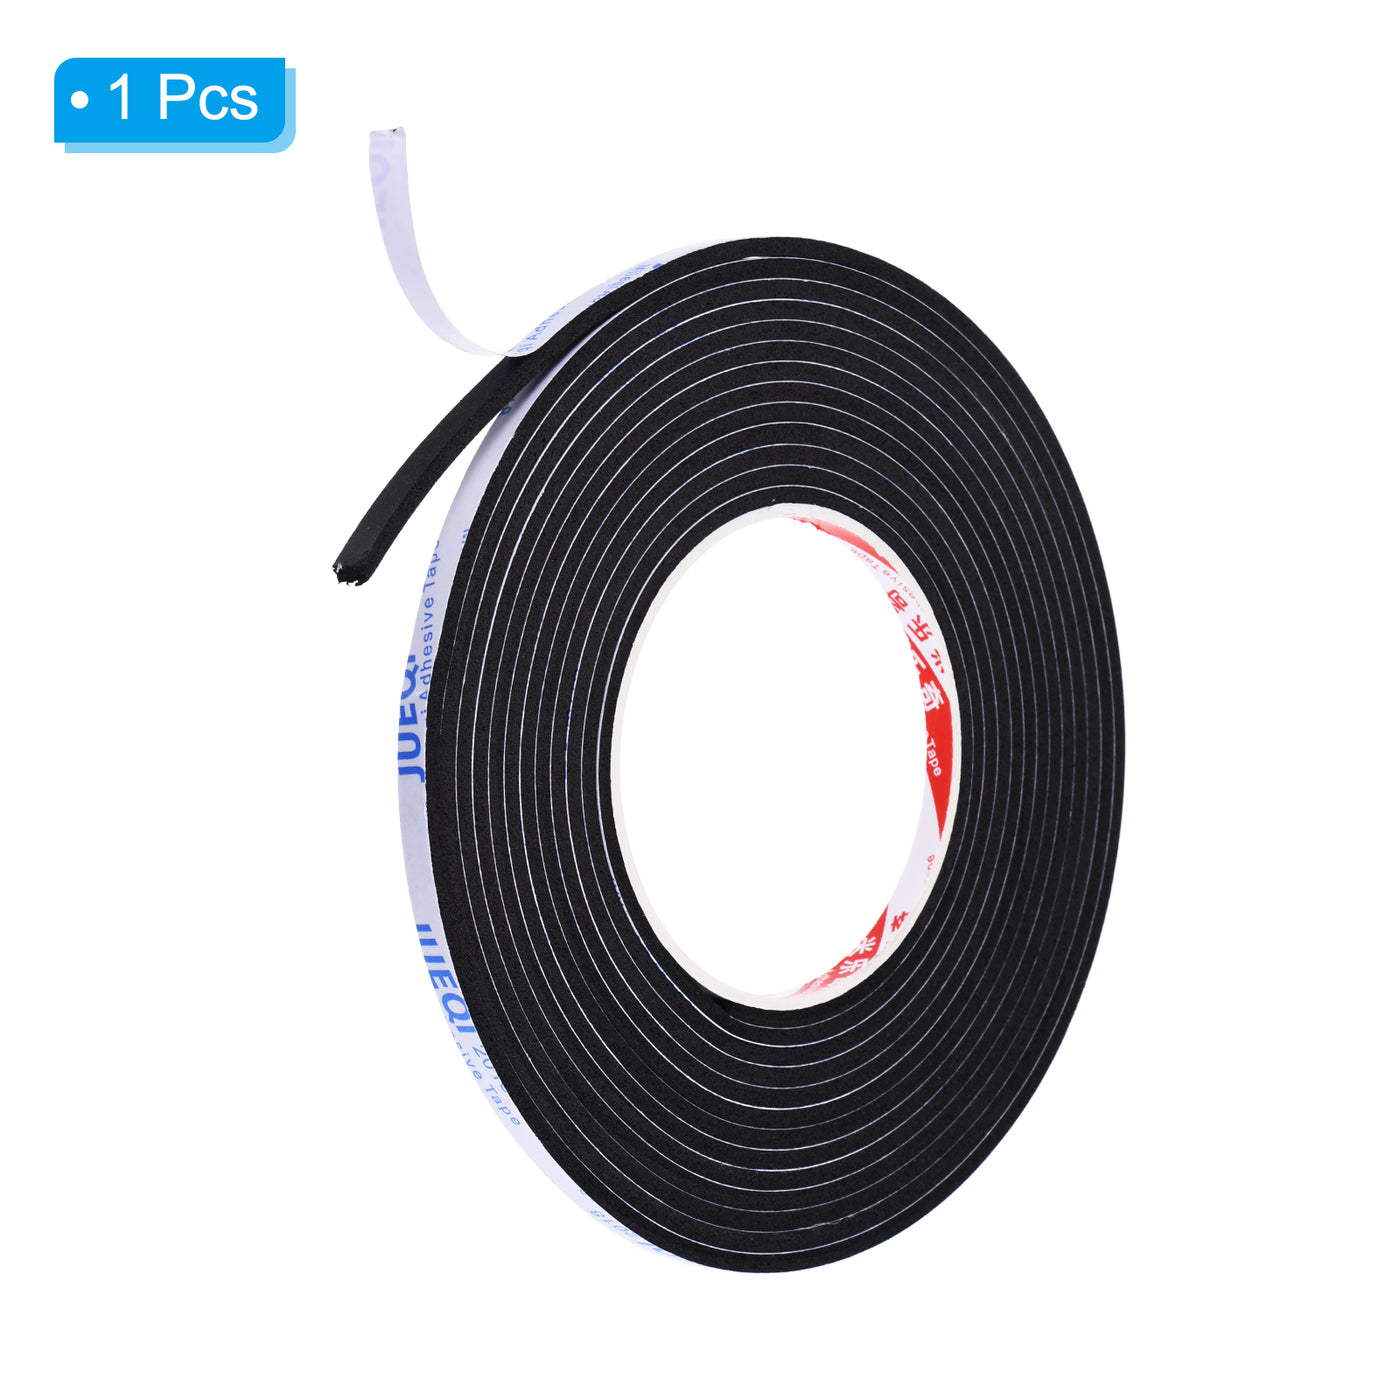 Harfington 5m/16.4ft Sealing Foam Tape, 6mm Wide 3mm Thick Single Sided Weather Stripping Door Seal Strip for Window Door Insulation, Black